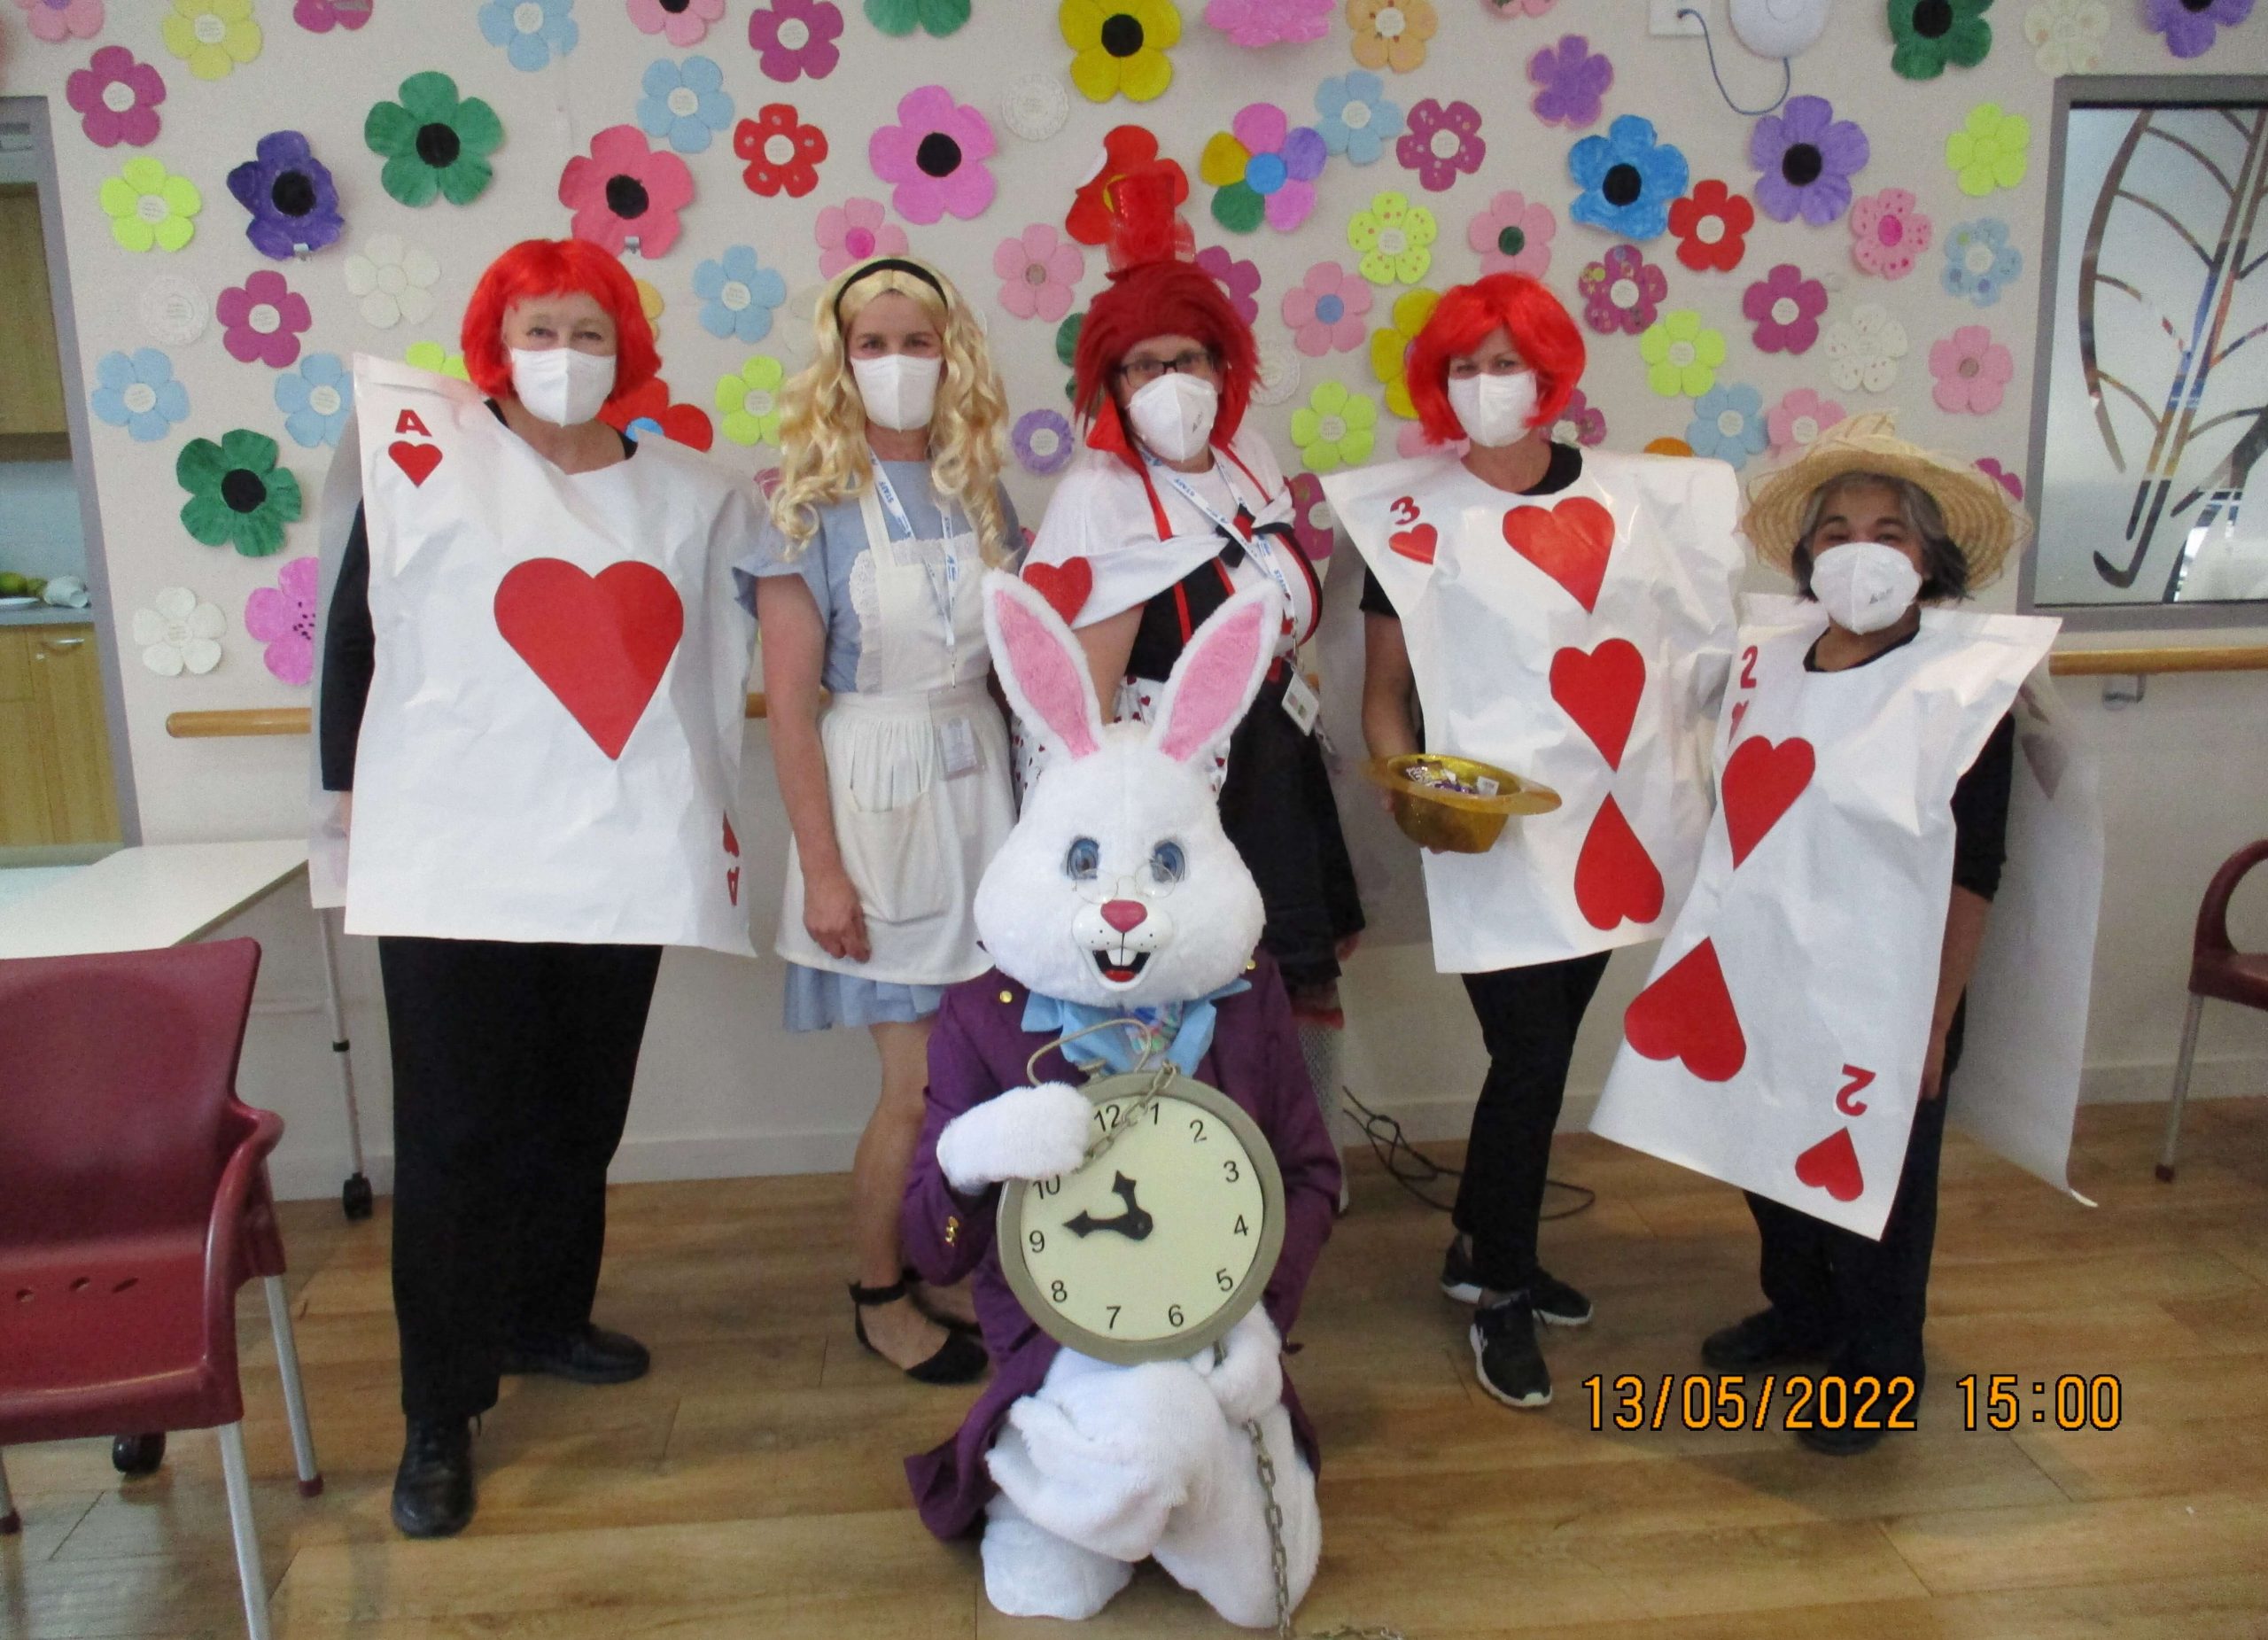 Photo at Yallambee Aged Care with staff dressed up as Alice in Wonderland characters - there is Alice, four 'cards', and a bunny holding a big pocket watch.